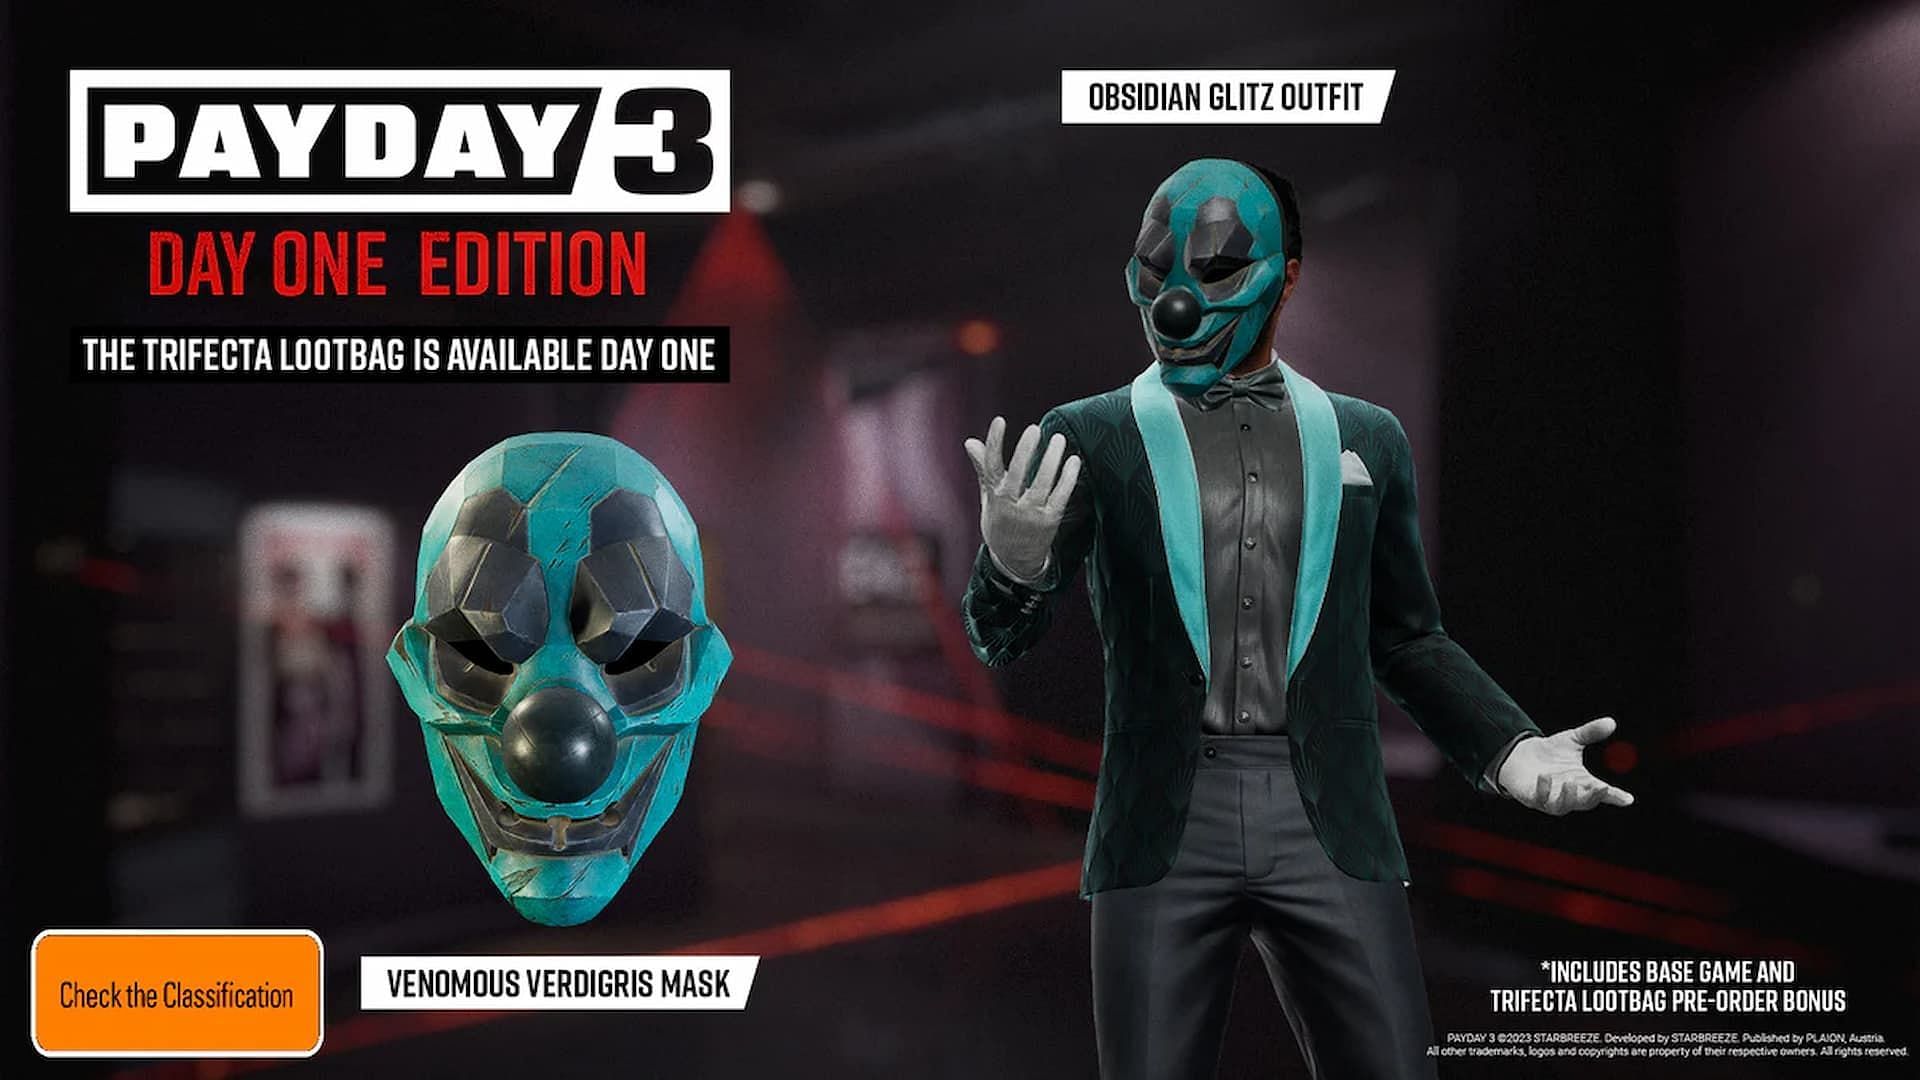 What to Know About Payday 3 Before Release